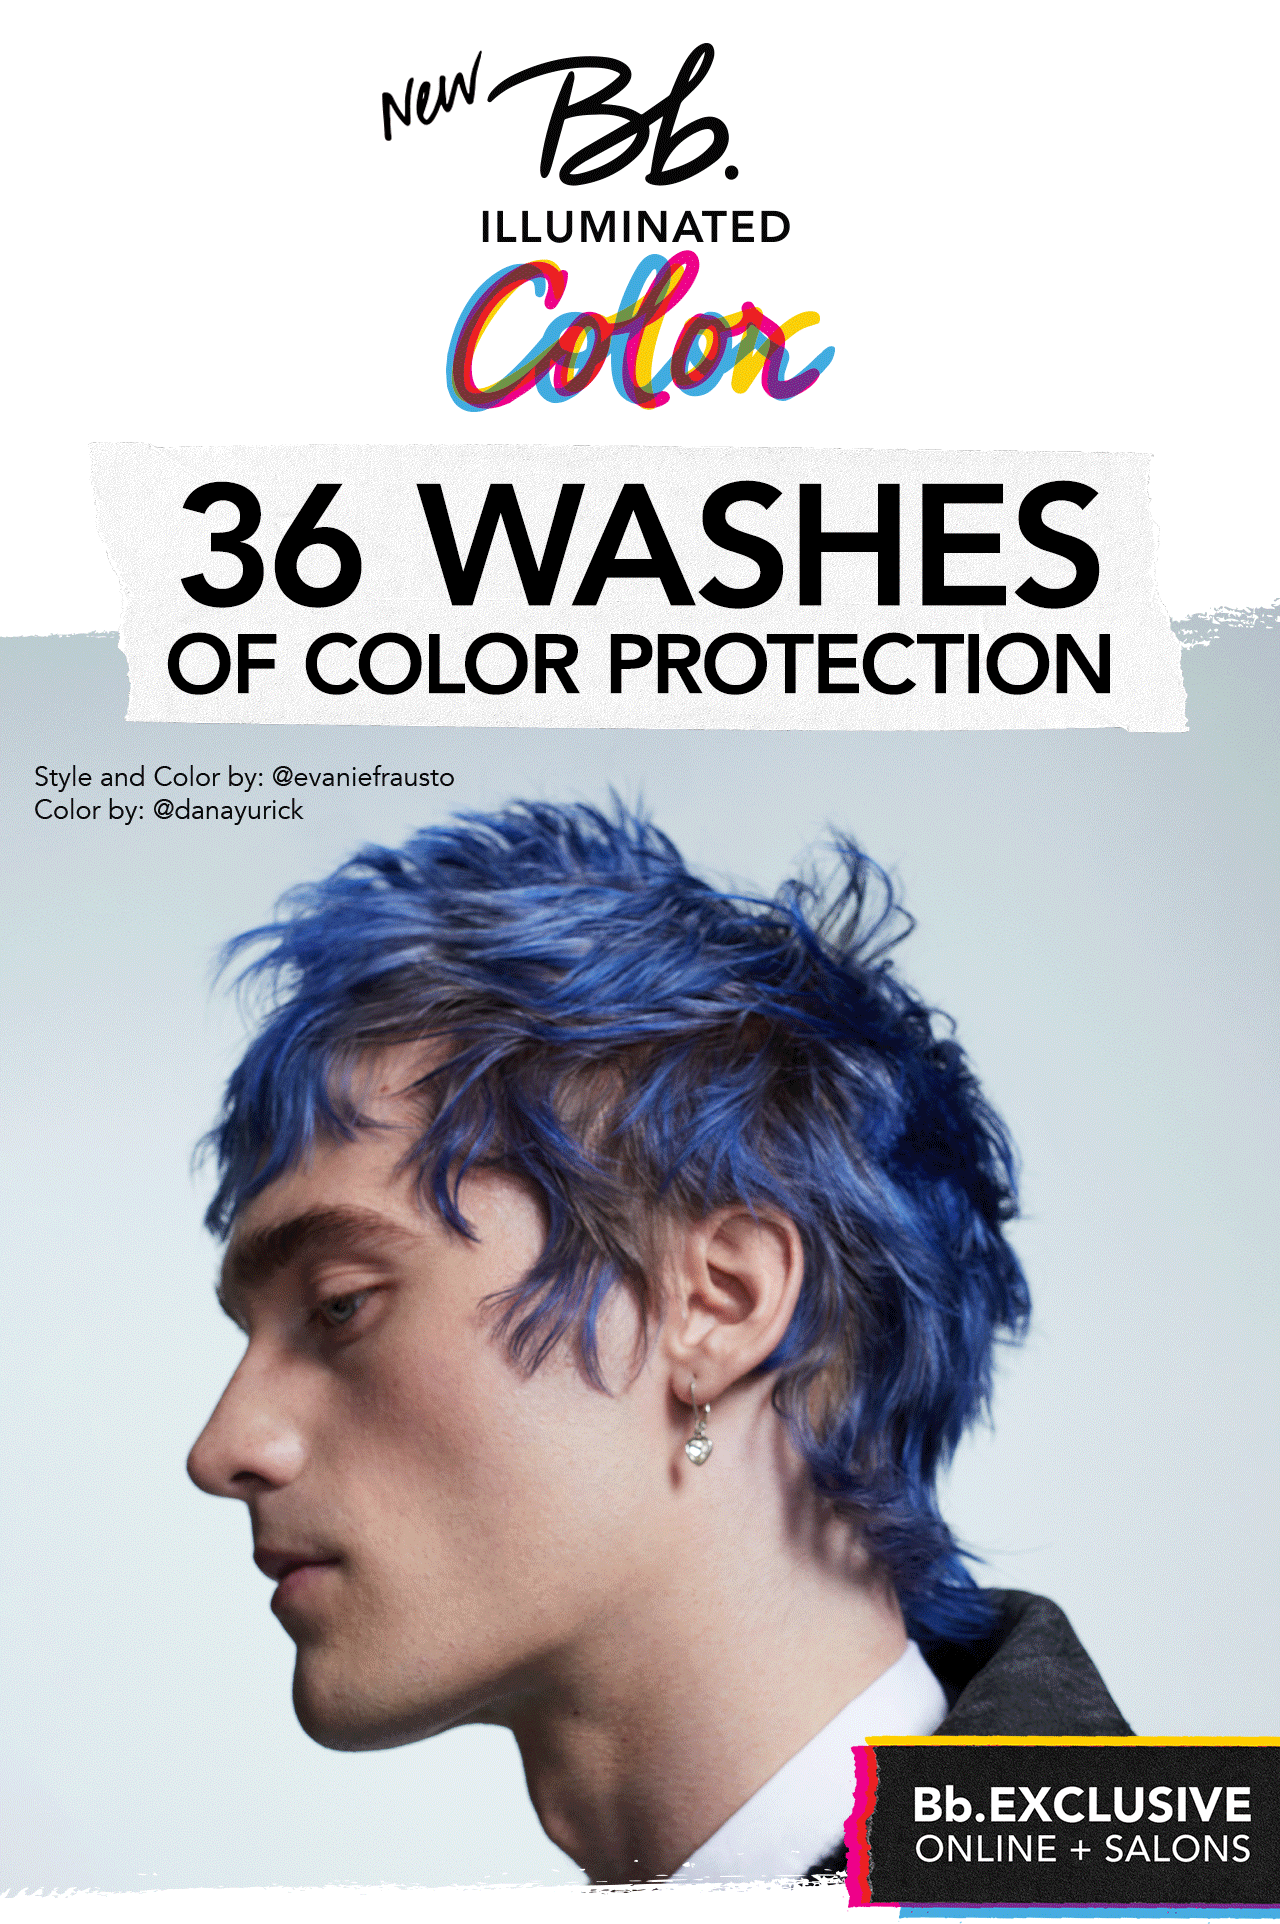 New Bb.Illuminated Color. 36 washes of color protection. Bb.Exclusive Online + Salons.